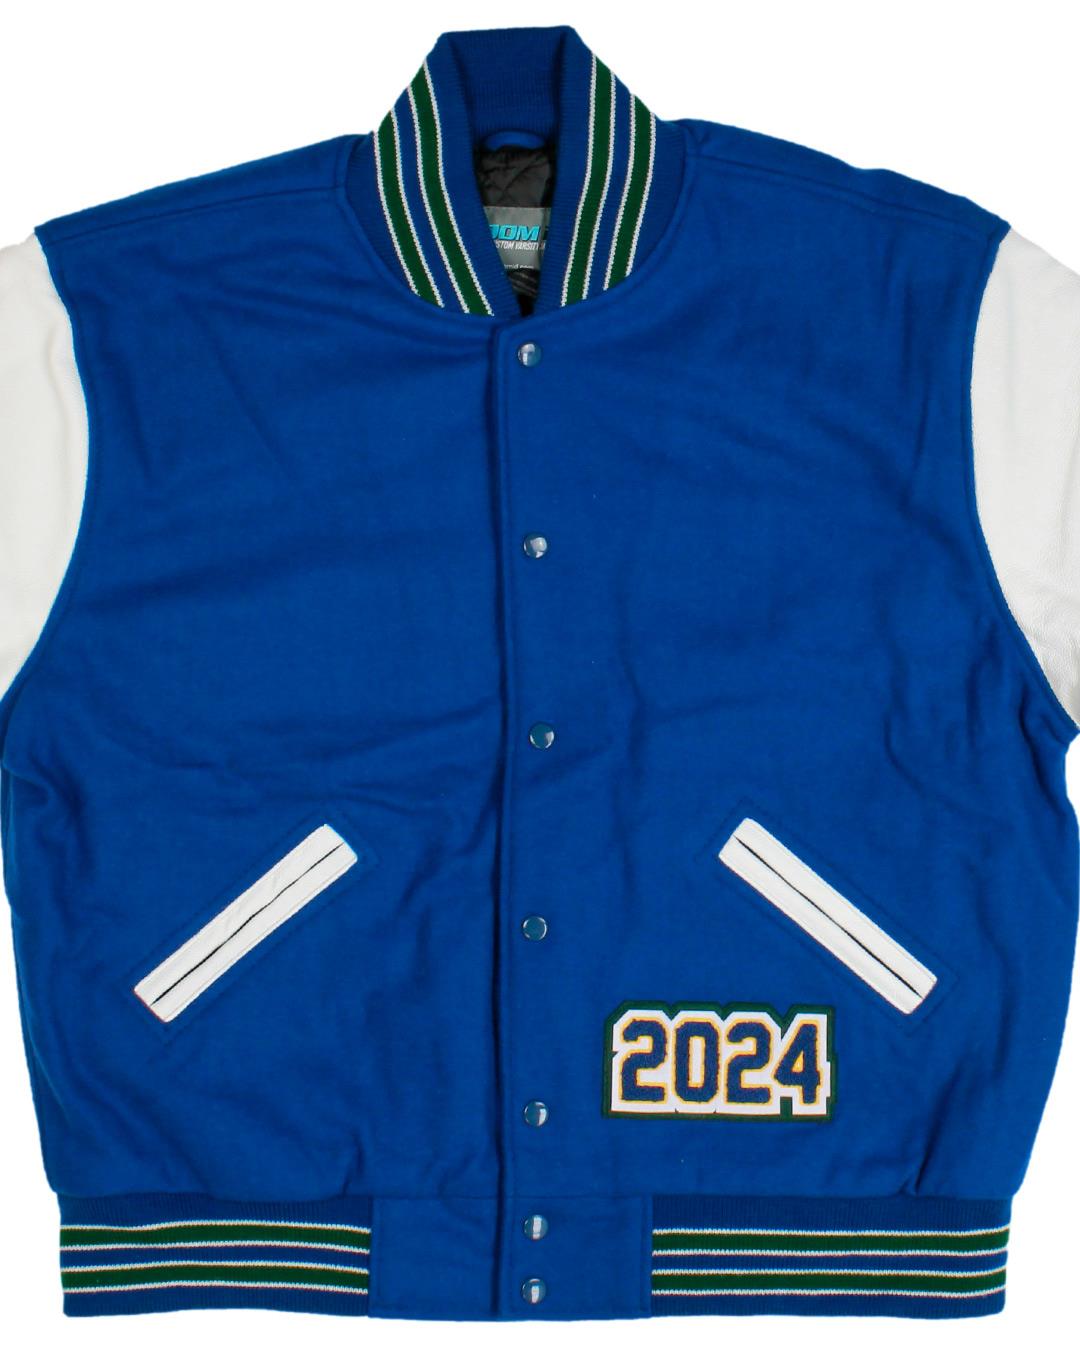 SkyView Academy Varsity Jacket, Highlands Ranch, CO - Front